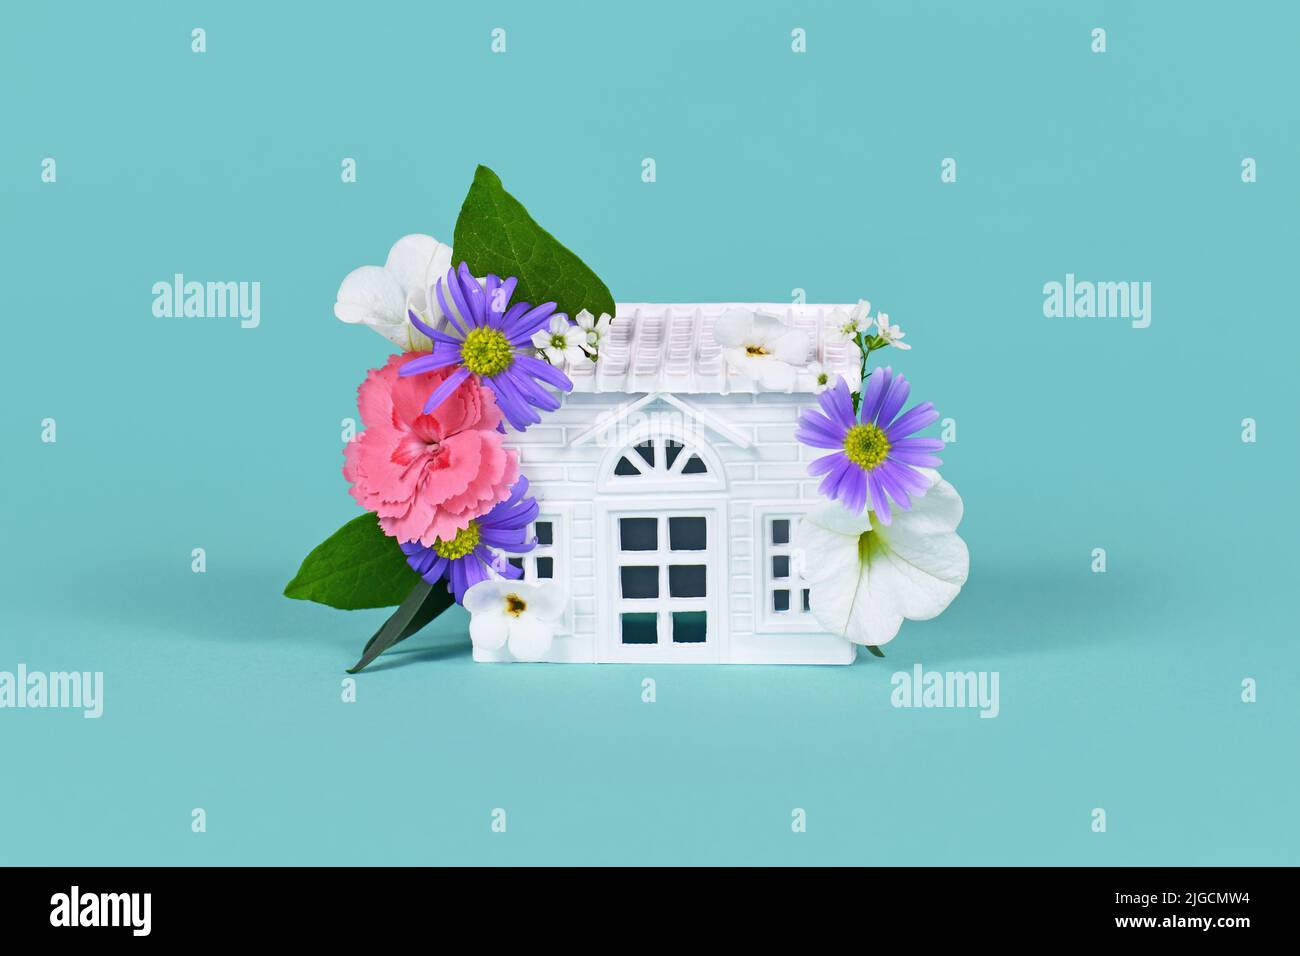 Concept for energy efficiency and carbon neutrality in buildings by using green construction designs and renewable energy showing house with flowers Stock Photo